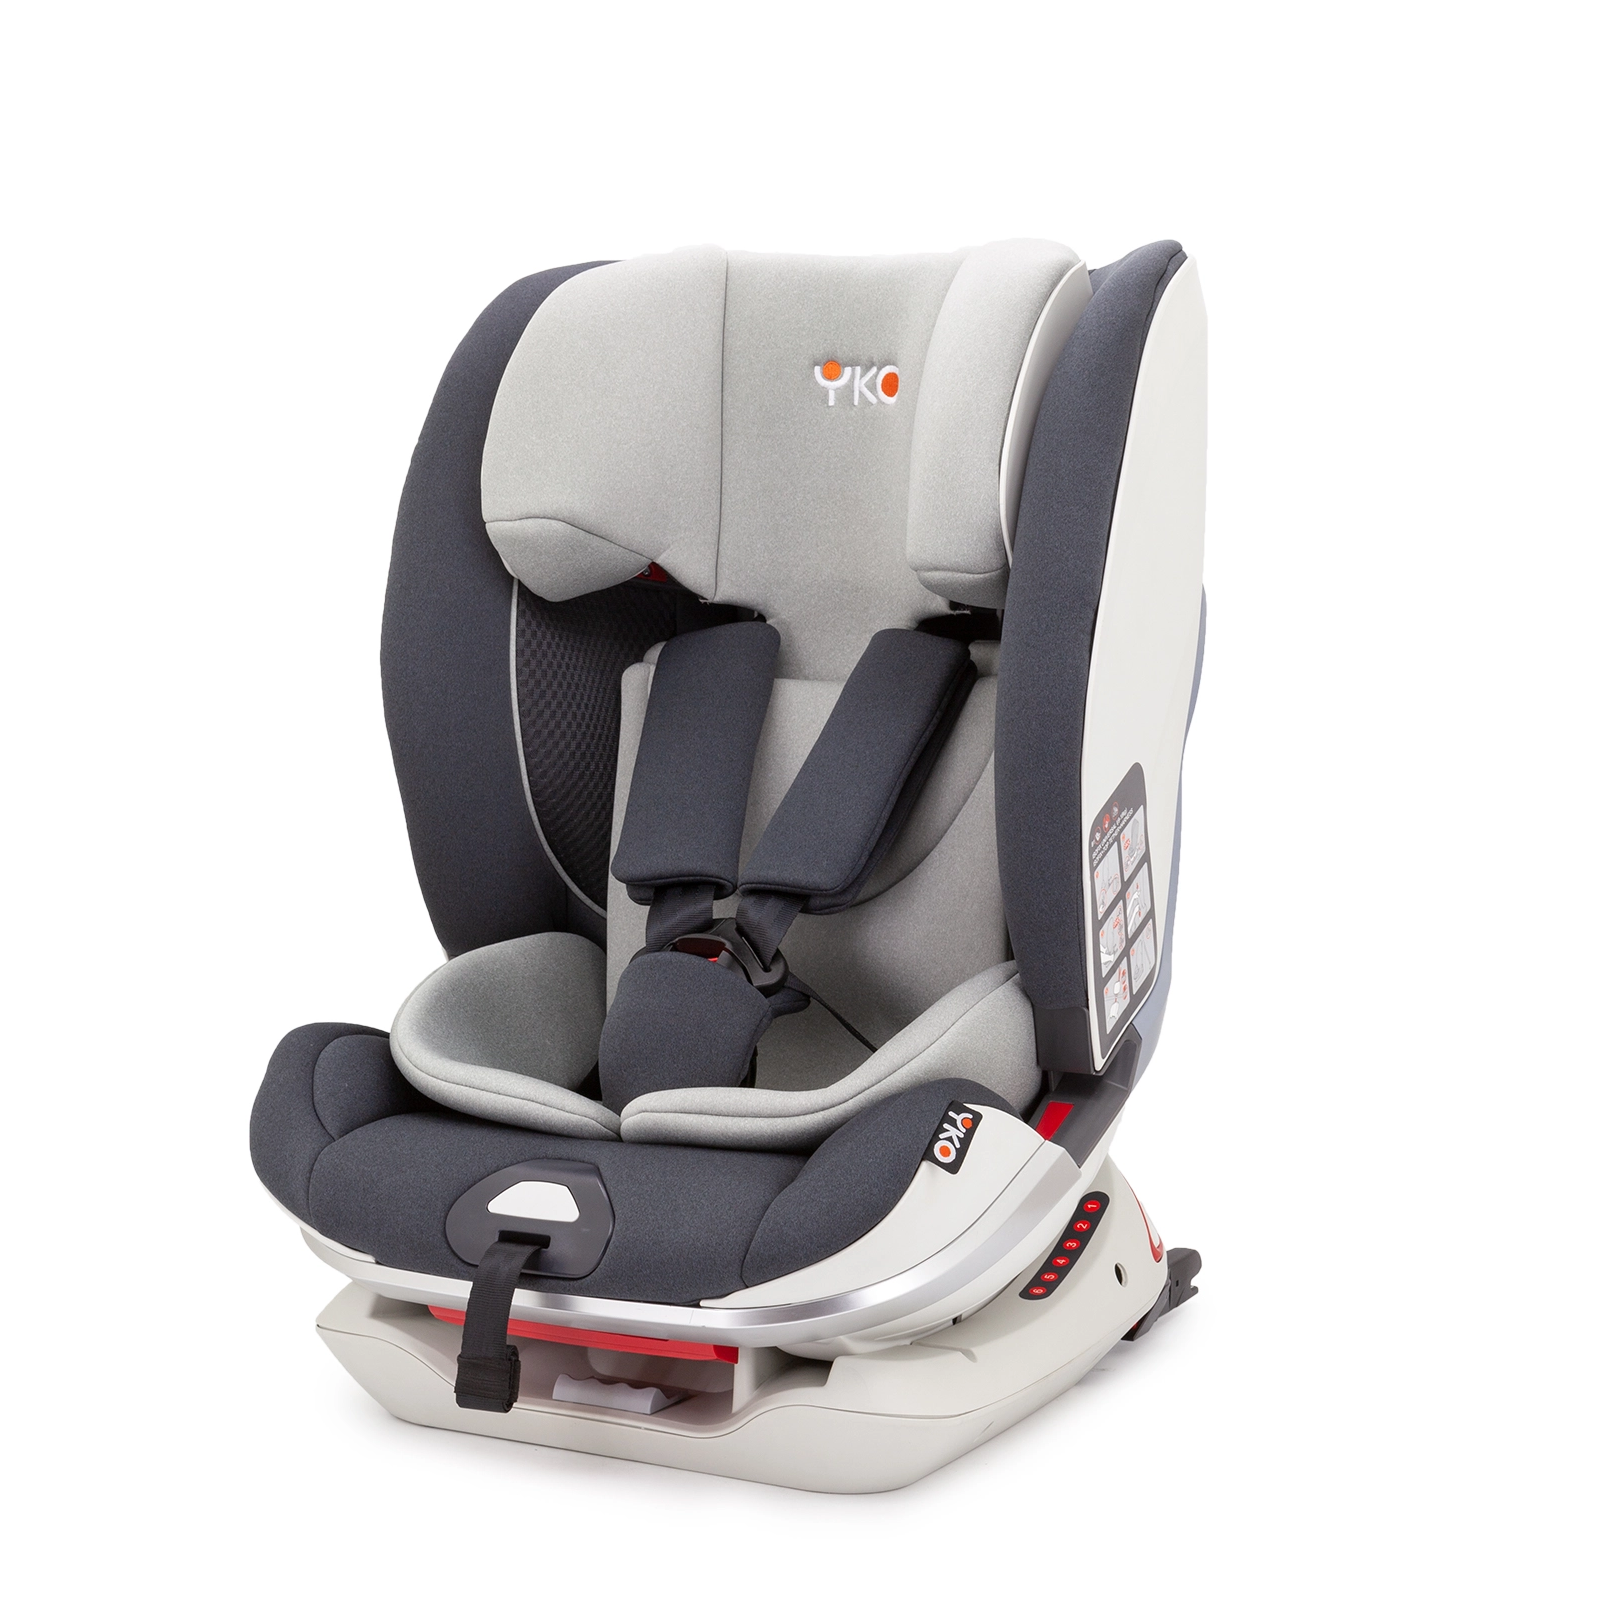 How to Choose a Baby Car Safety Seat for Small Cars